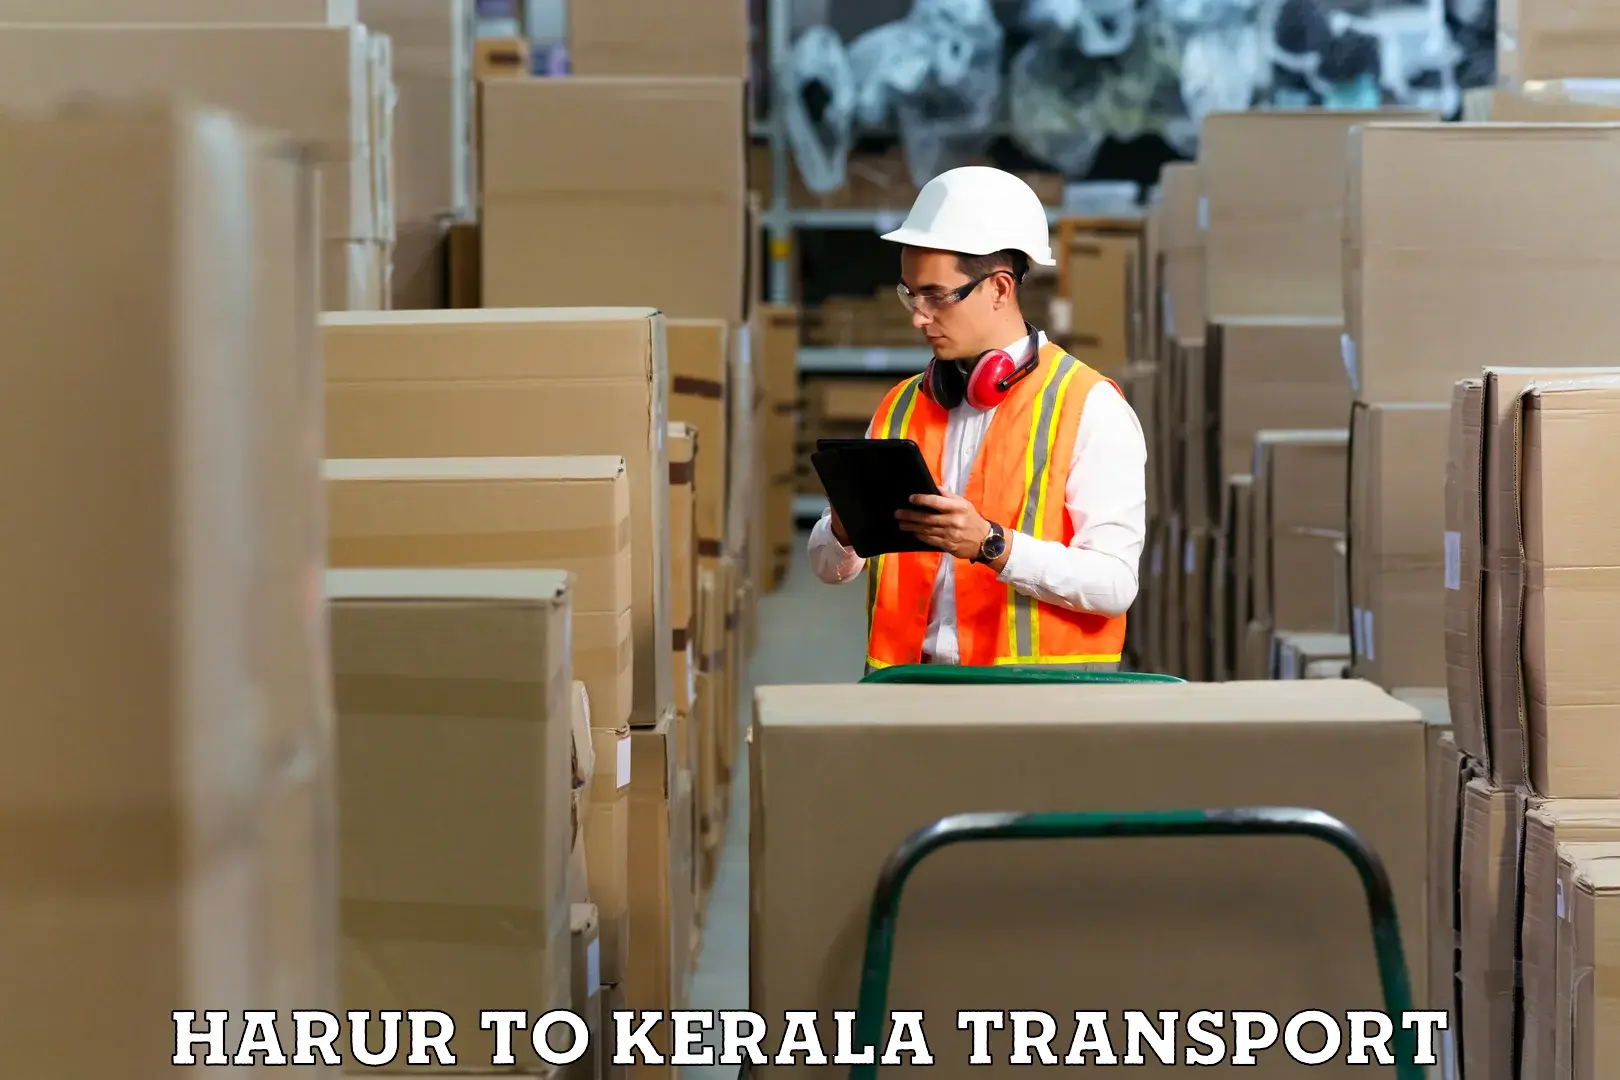 Daily parcel service transport Harur to Palai